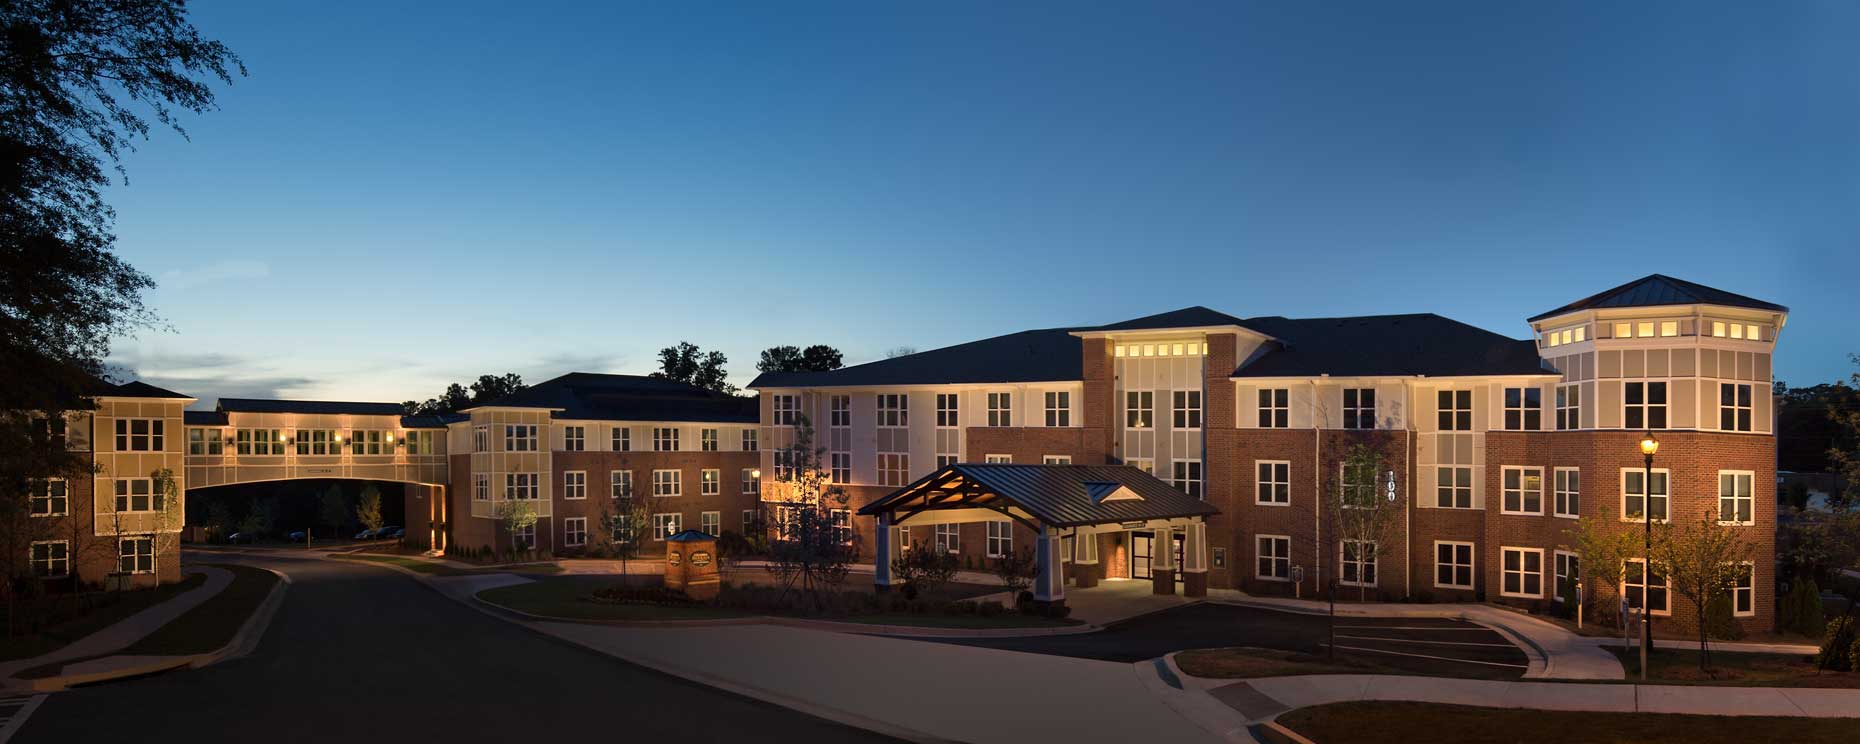 A stunning twilight view of the buildings and bridge at the Columbia Brookside Senior Residences